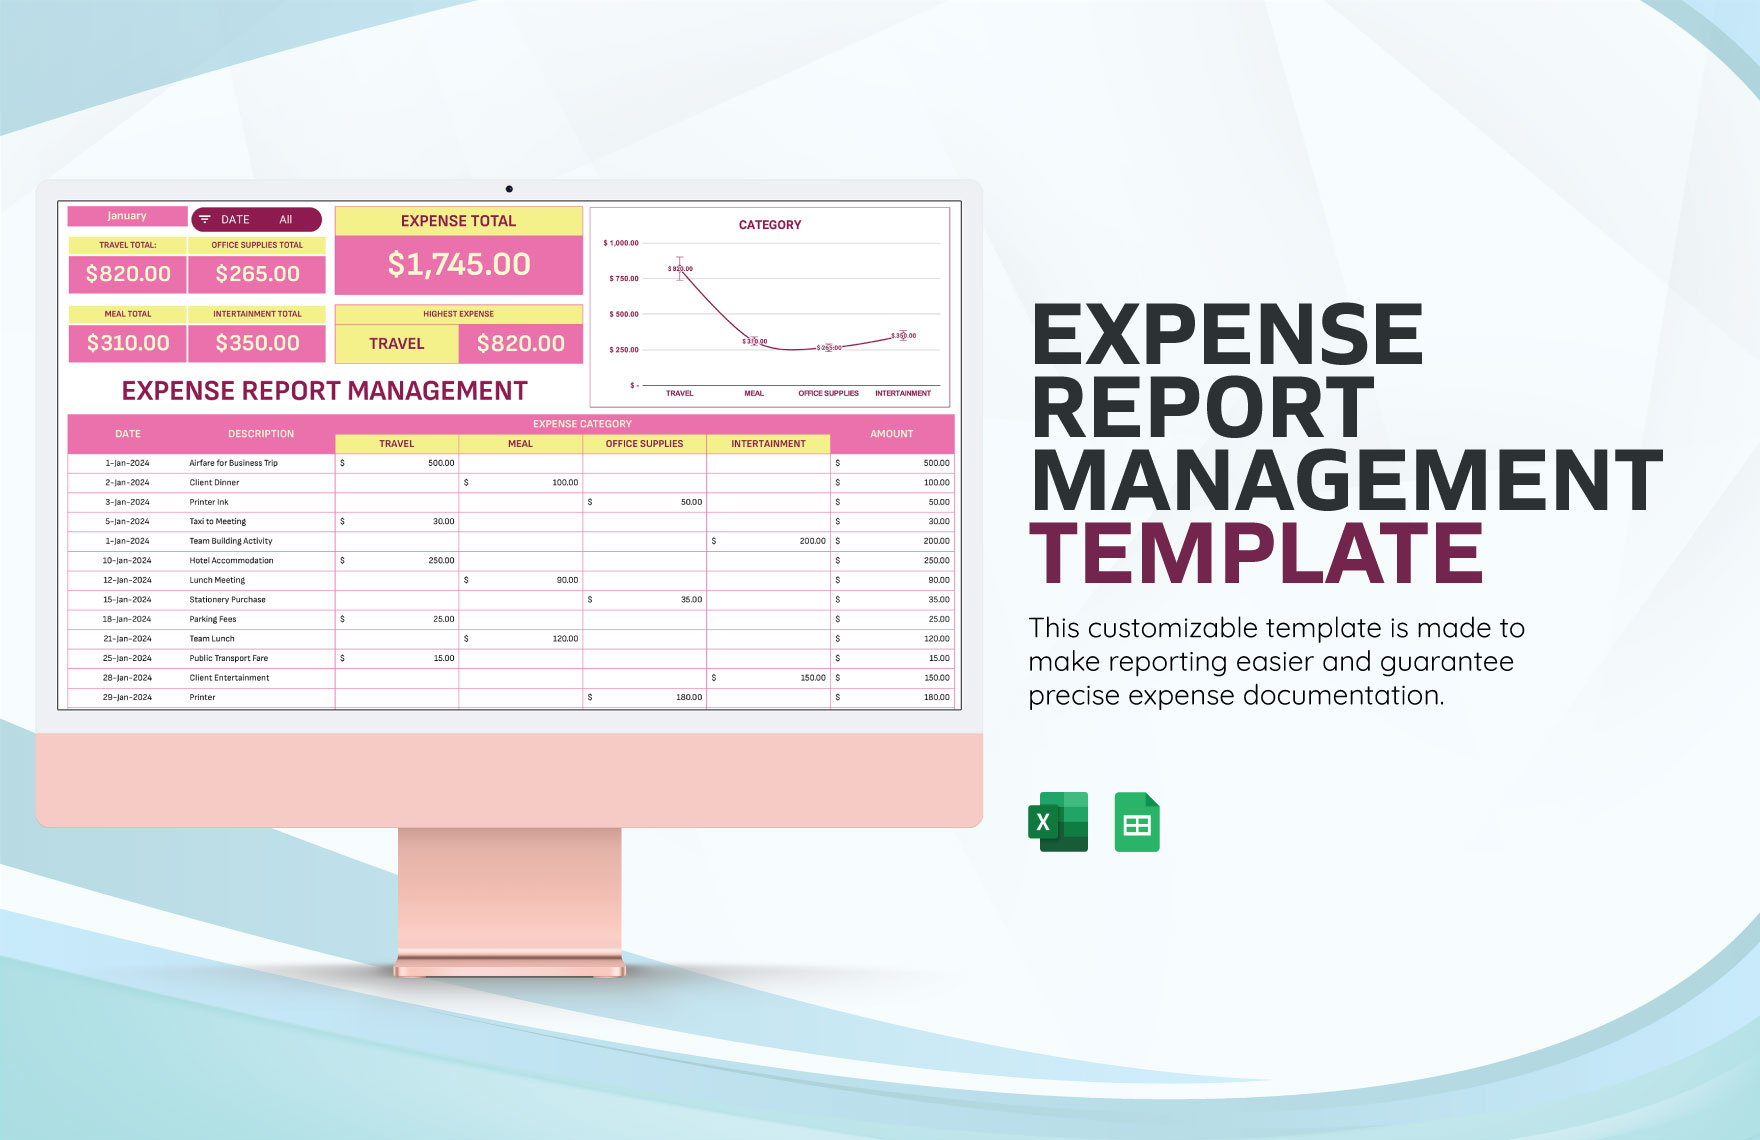 Expense Report Management Template in Excel, Google Sheets